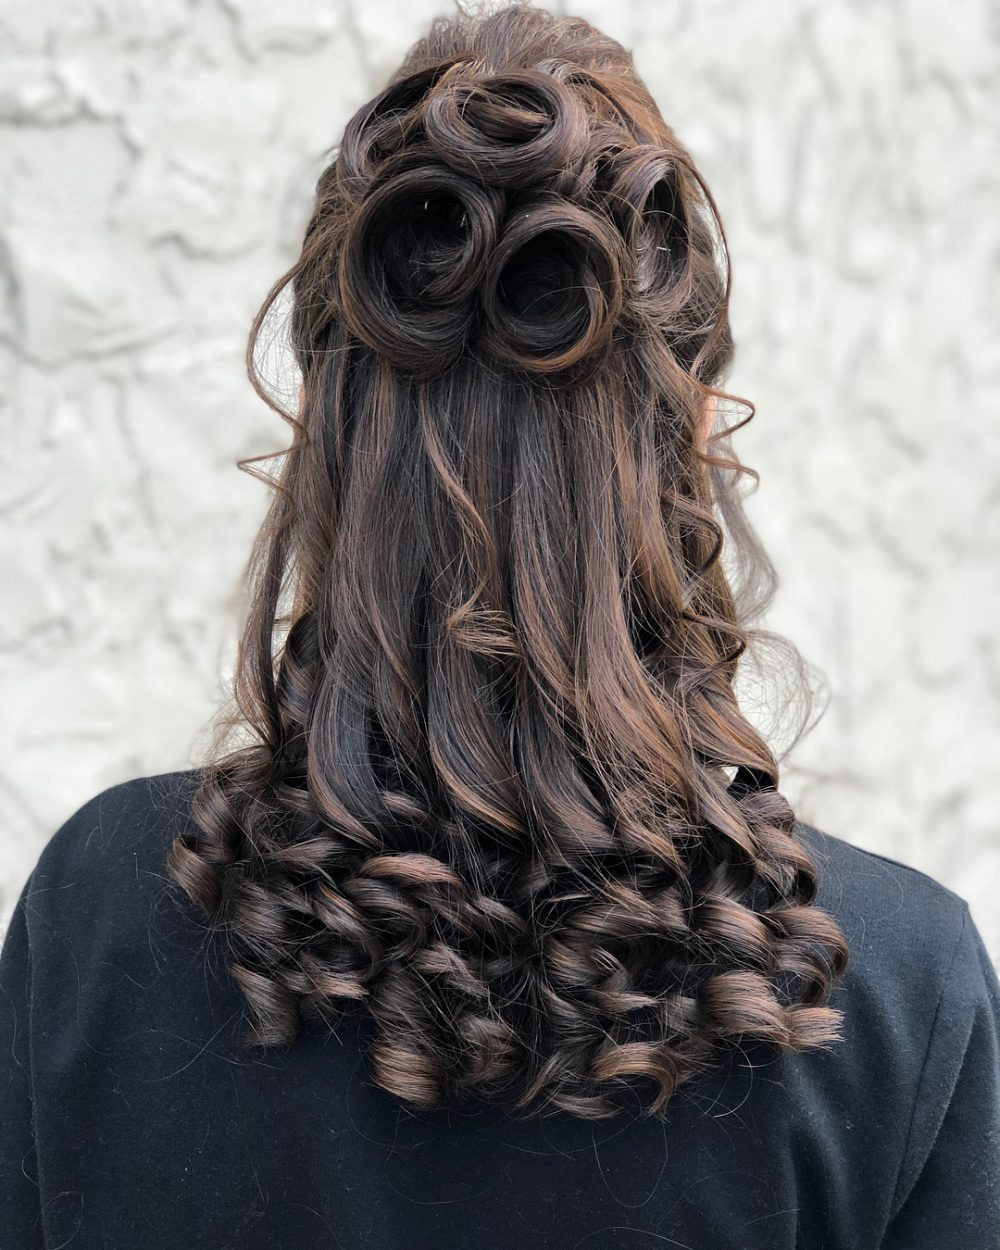 Pretty Hairstyles For Prom
 23 Cute Prom Hairstyles for 2019 Updos Braids Half Ups